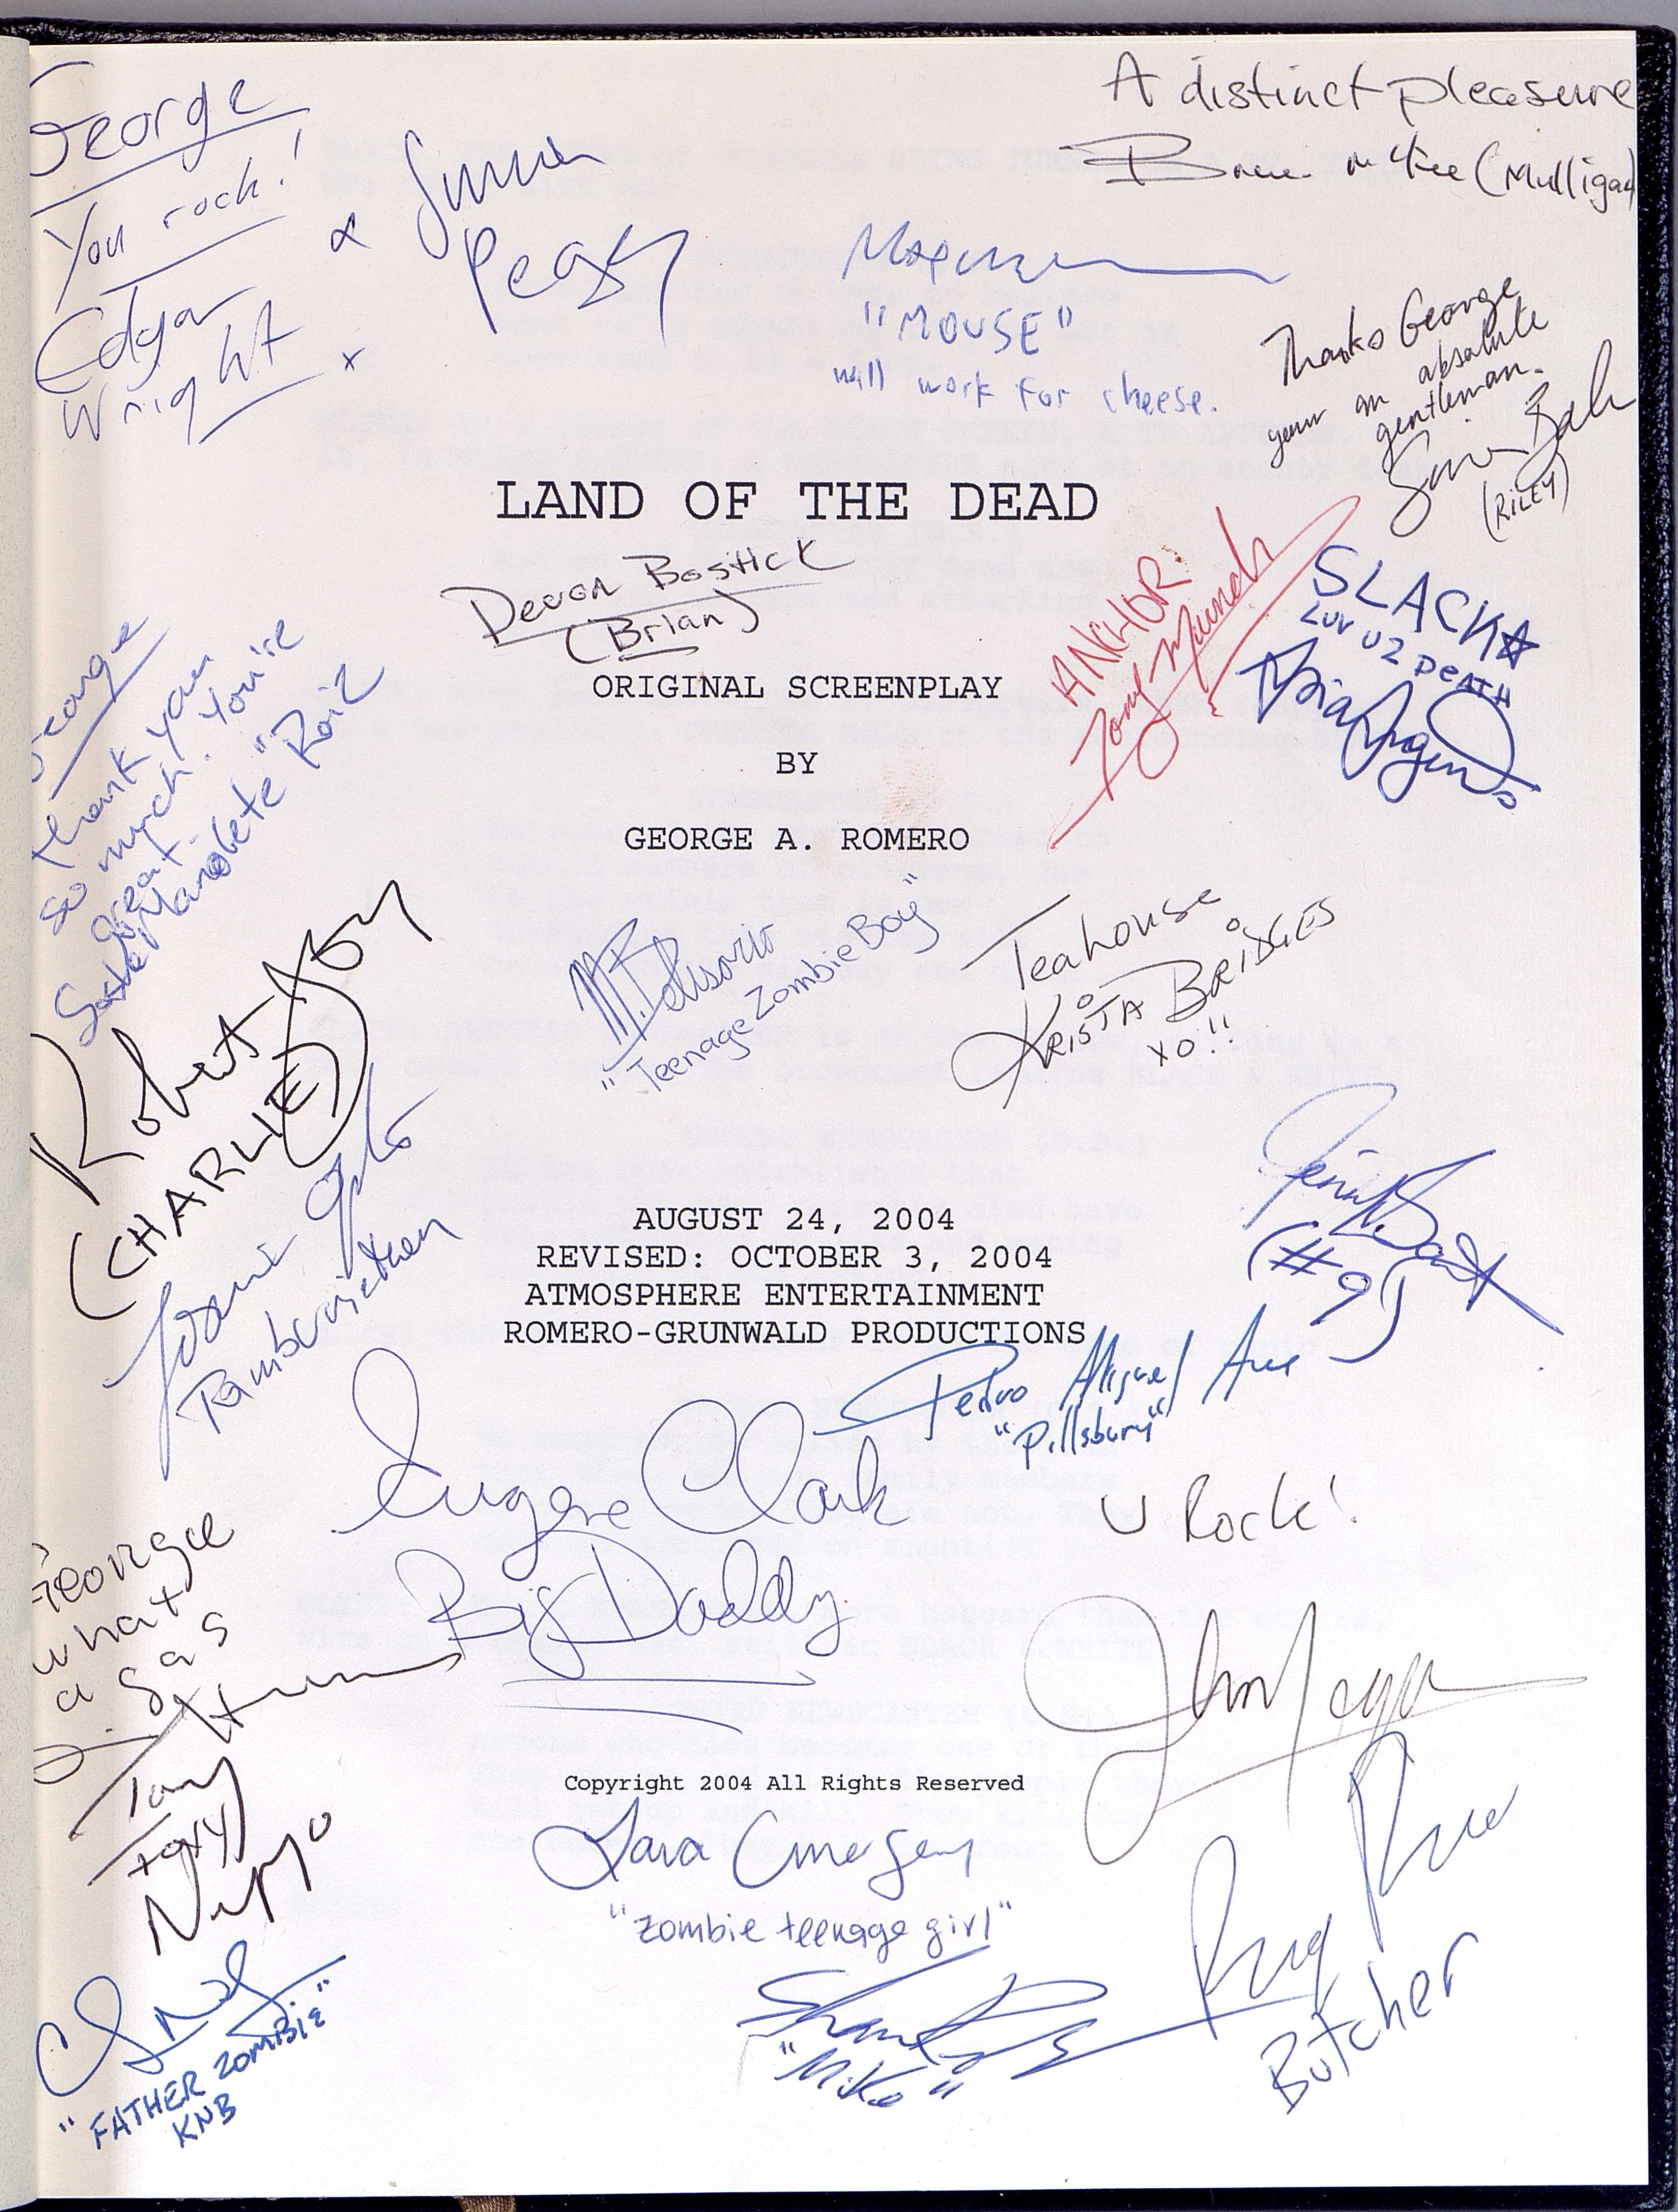 Script from Land of the Dead